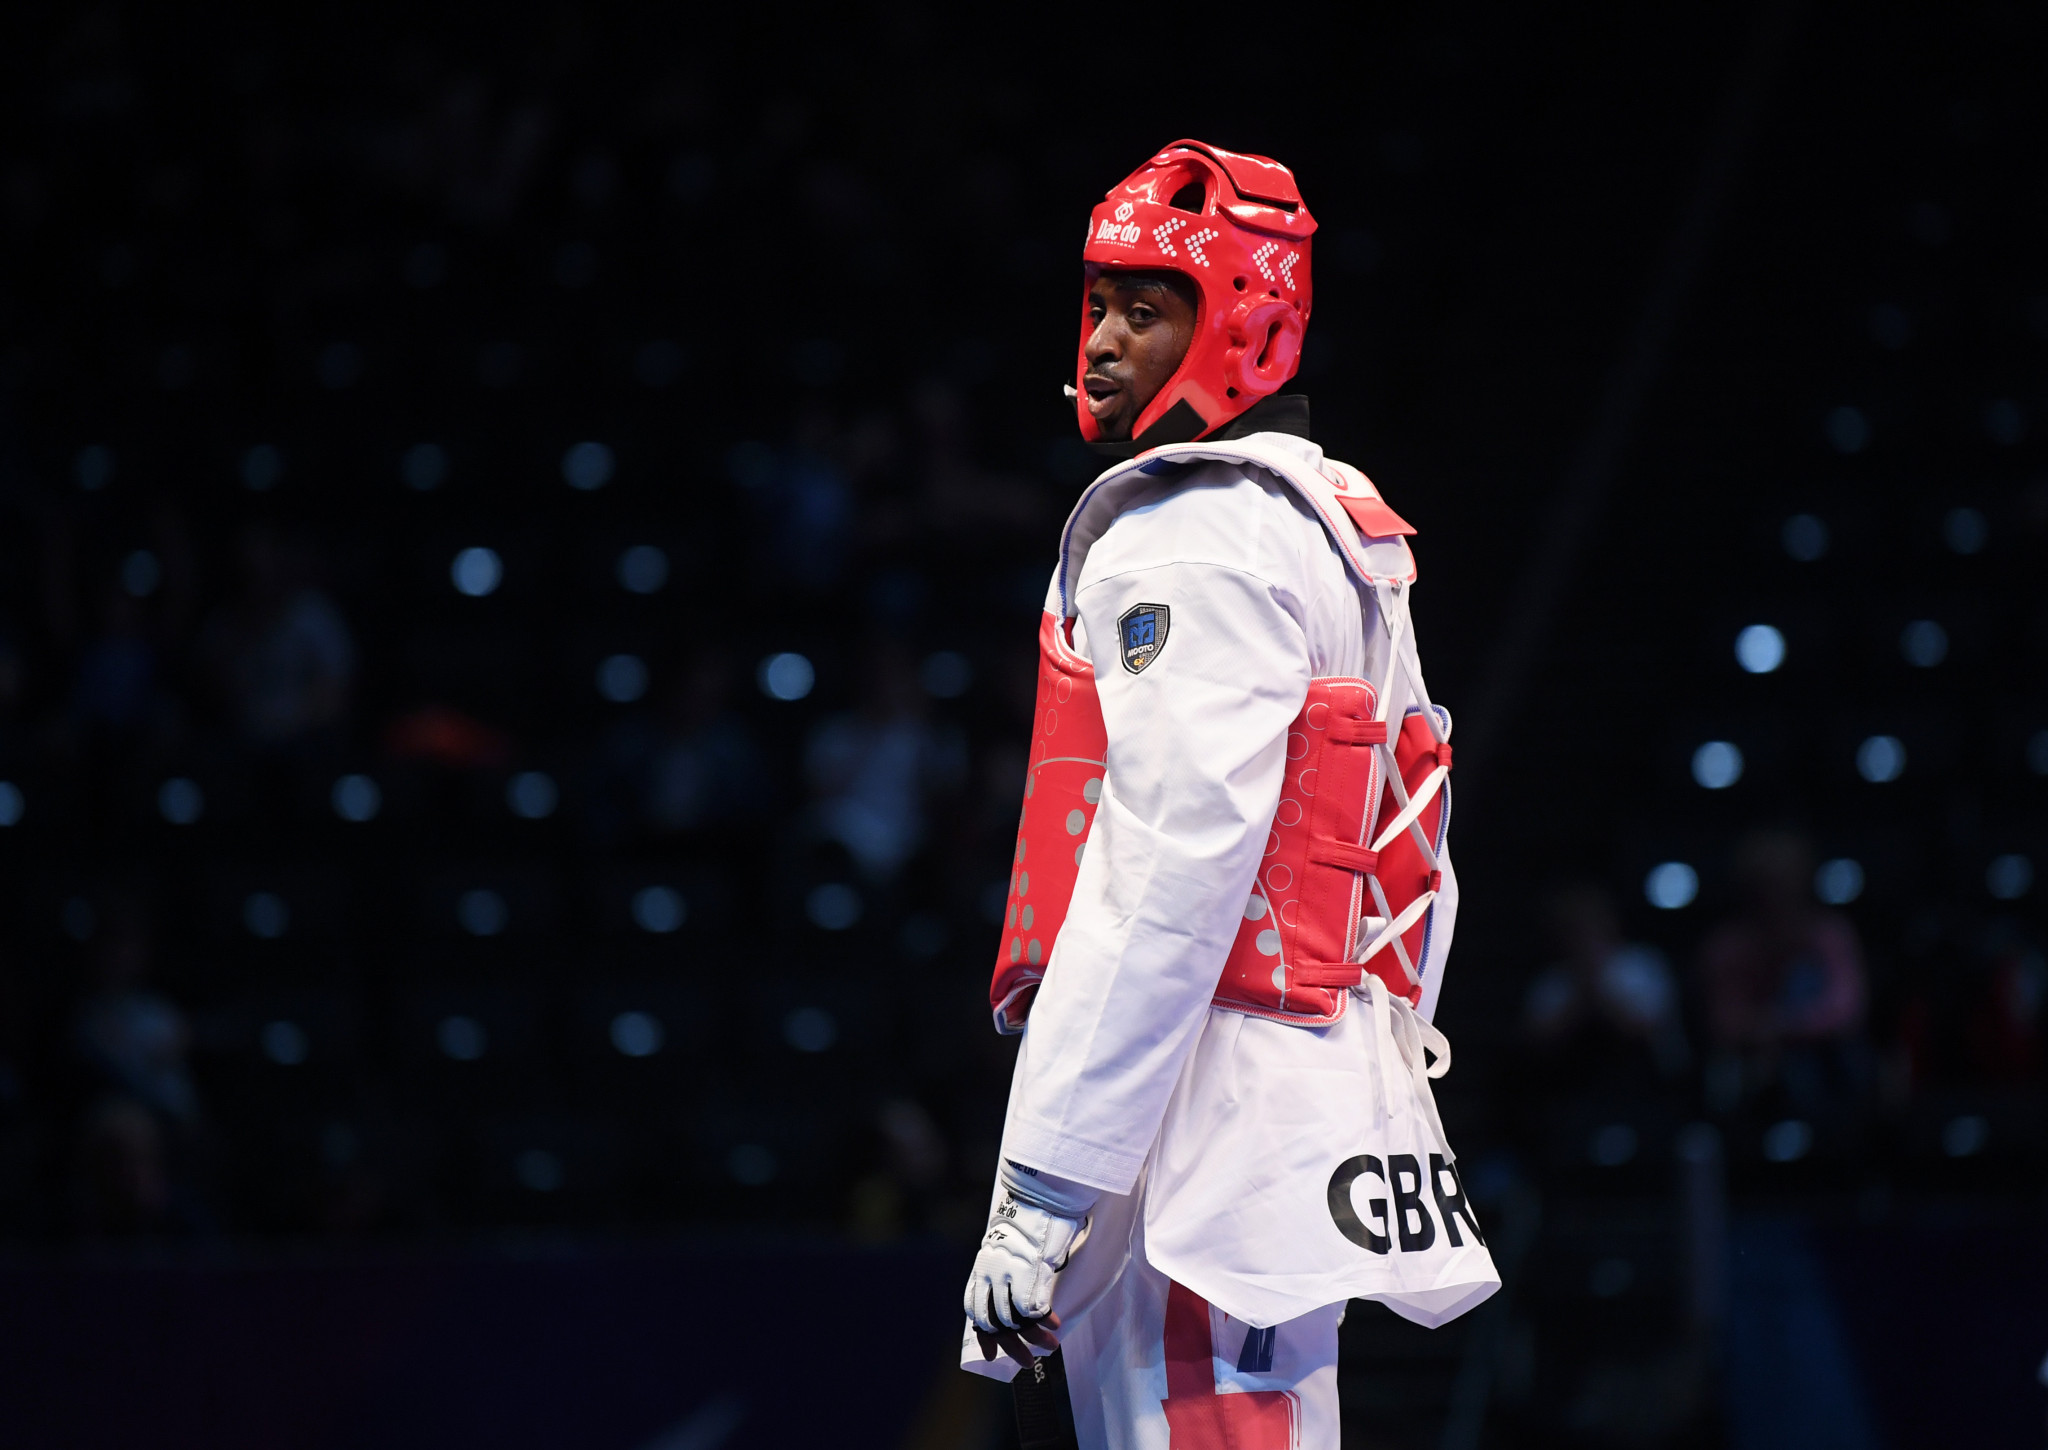 British taekwondo star Cho "more hungry" for Tokyo 2020 after break in sport